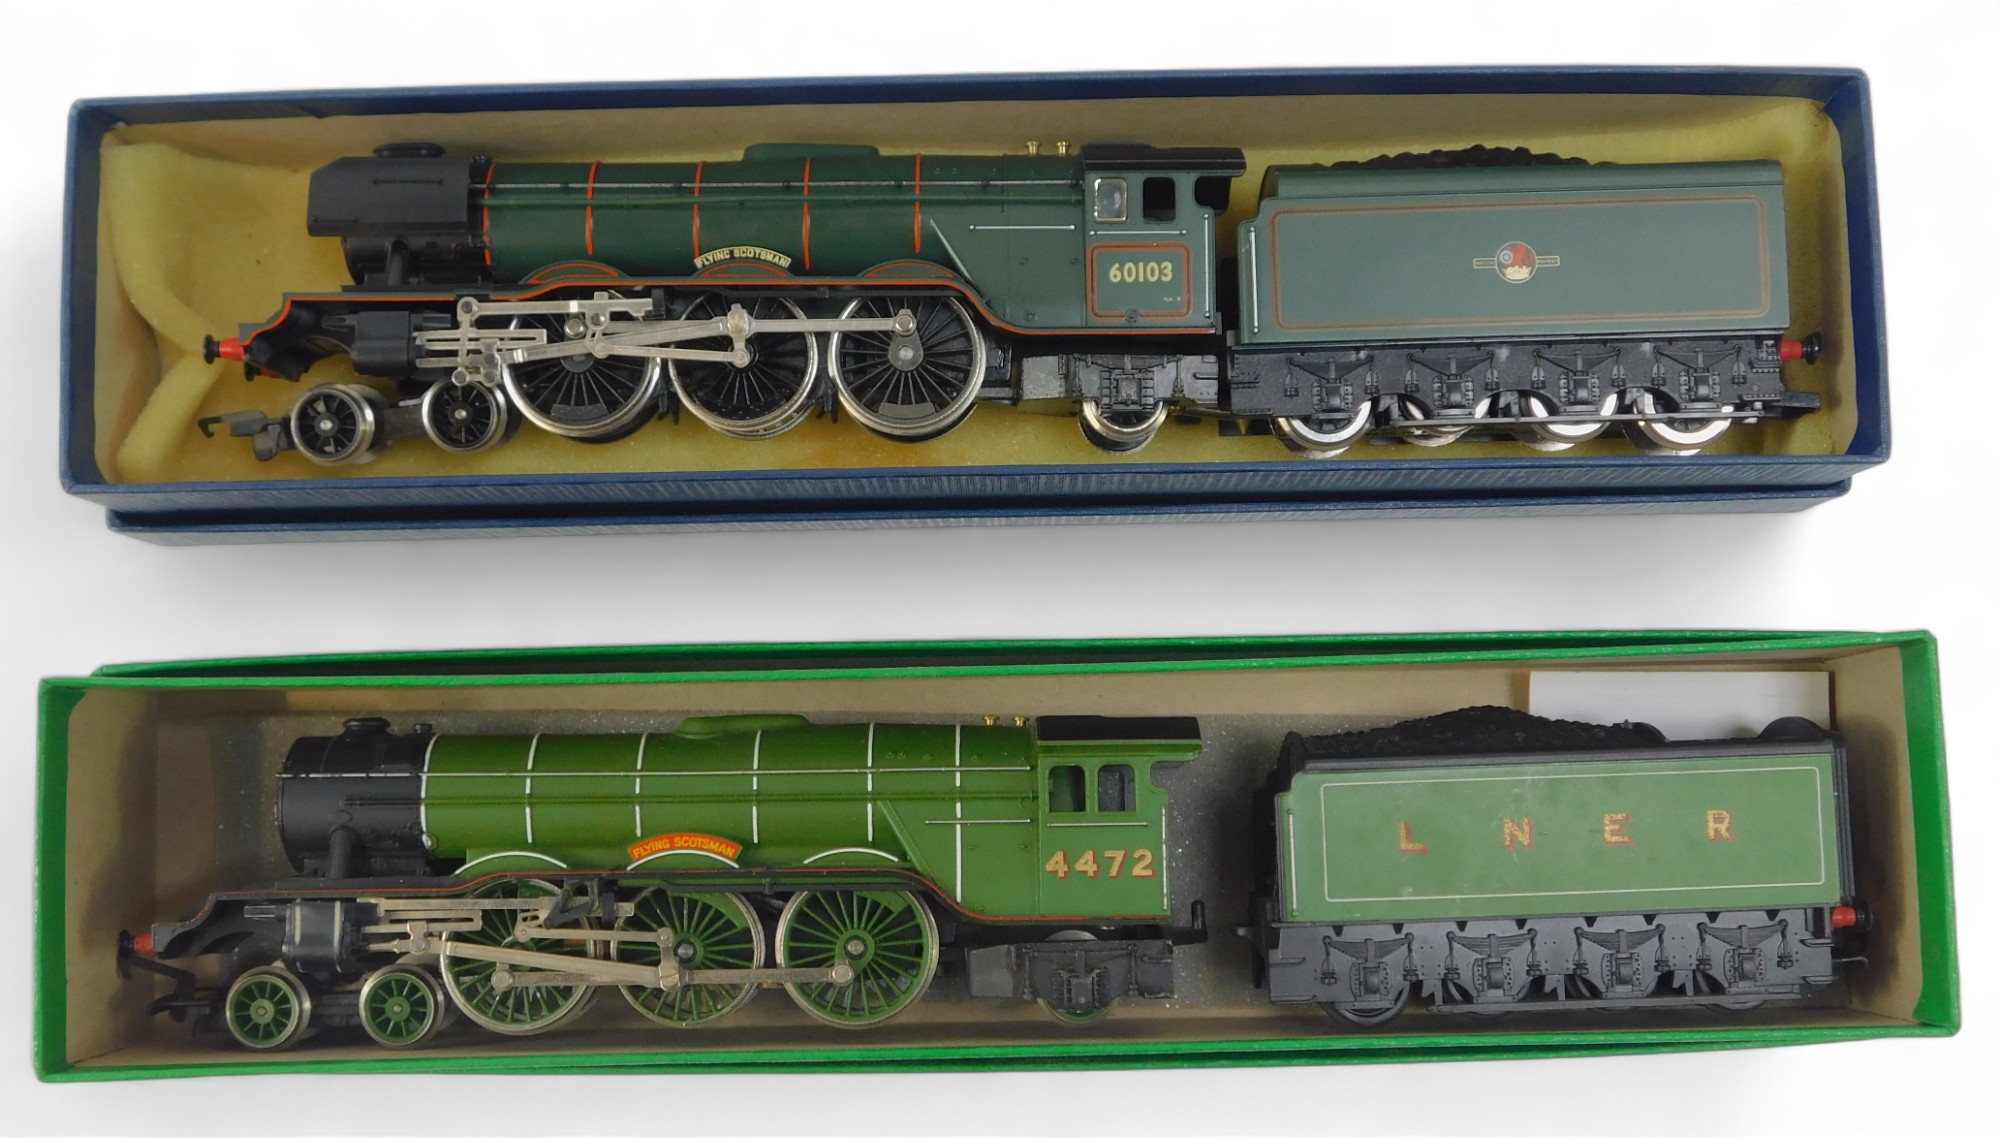 Hornby OO gauge Class A1 locomotive The Flying Scotsman 4472, LNER green livery, together with a kit